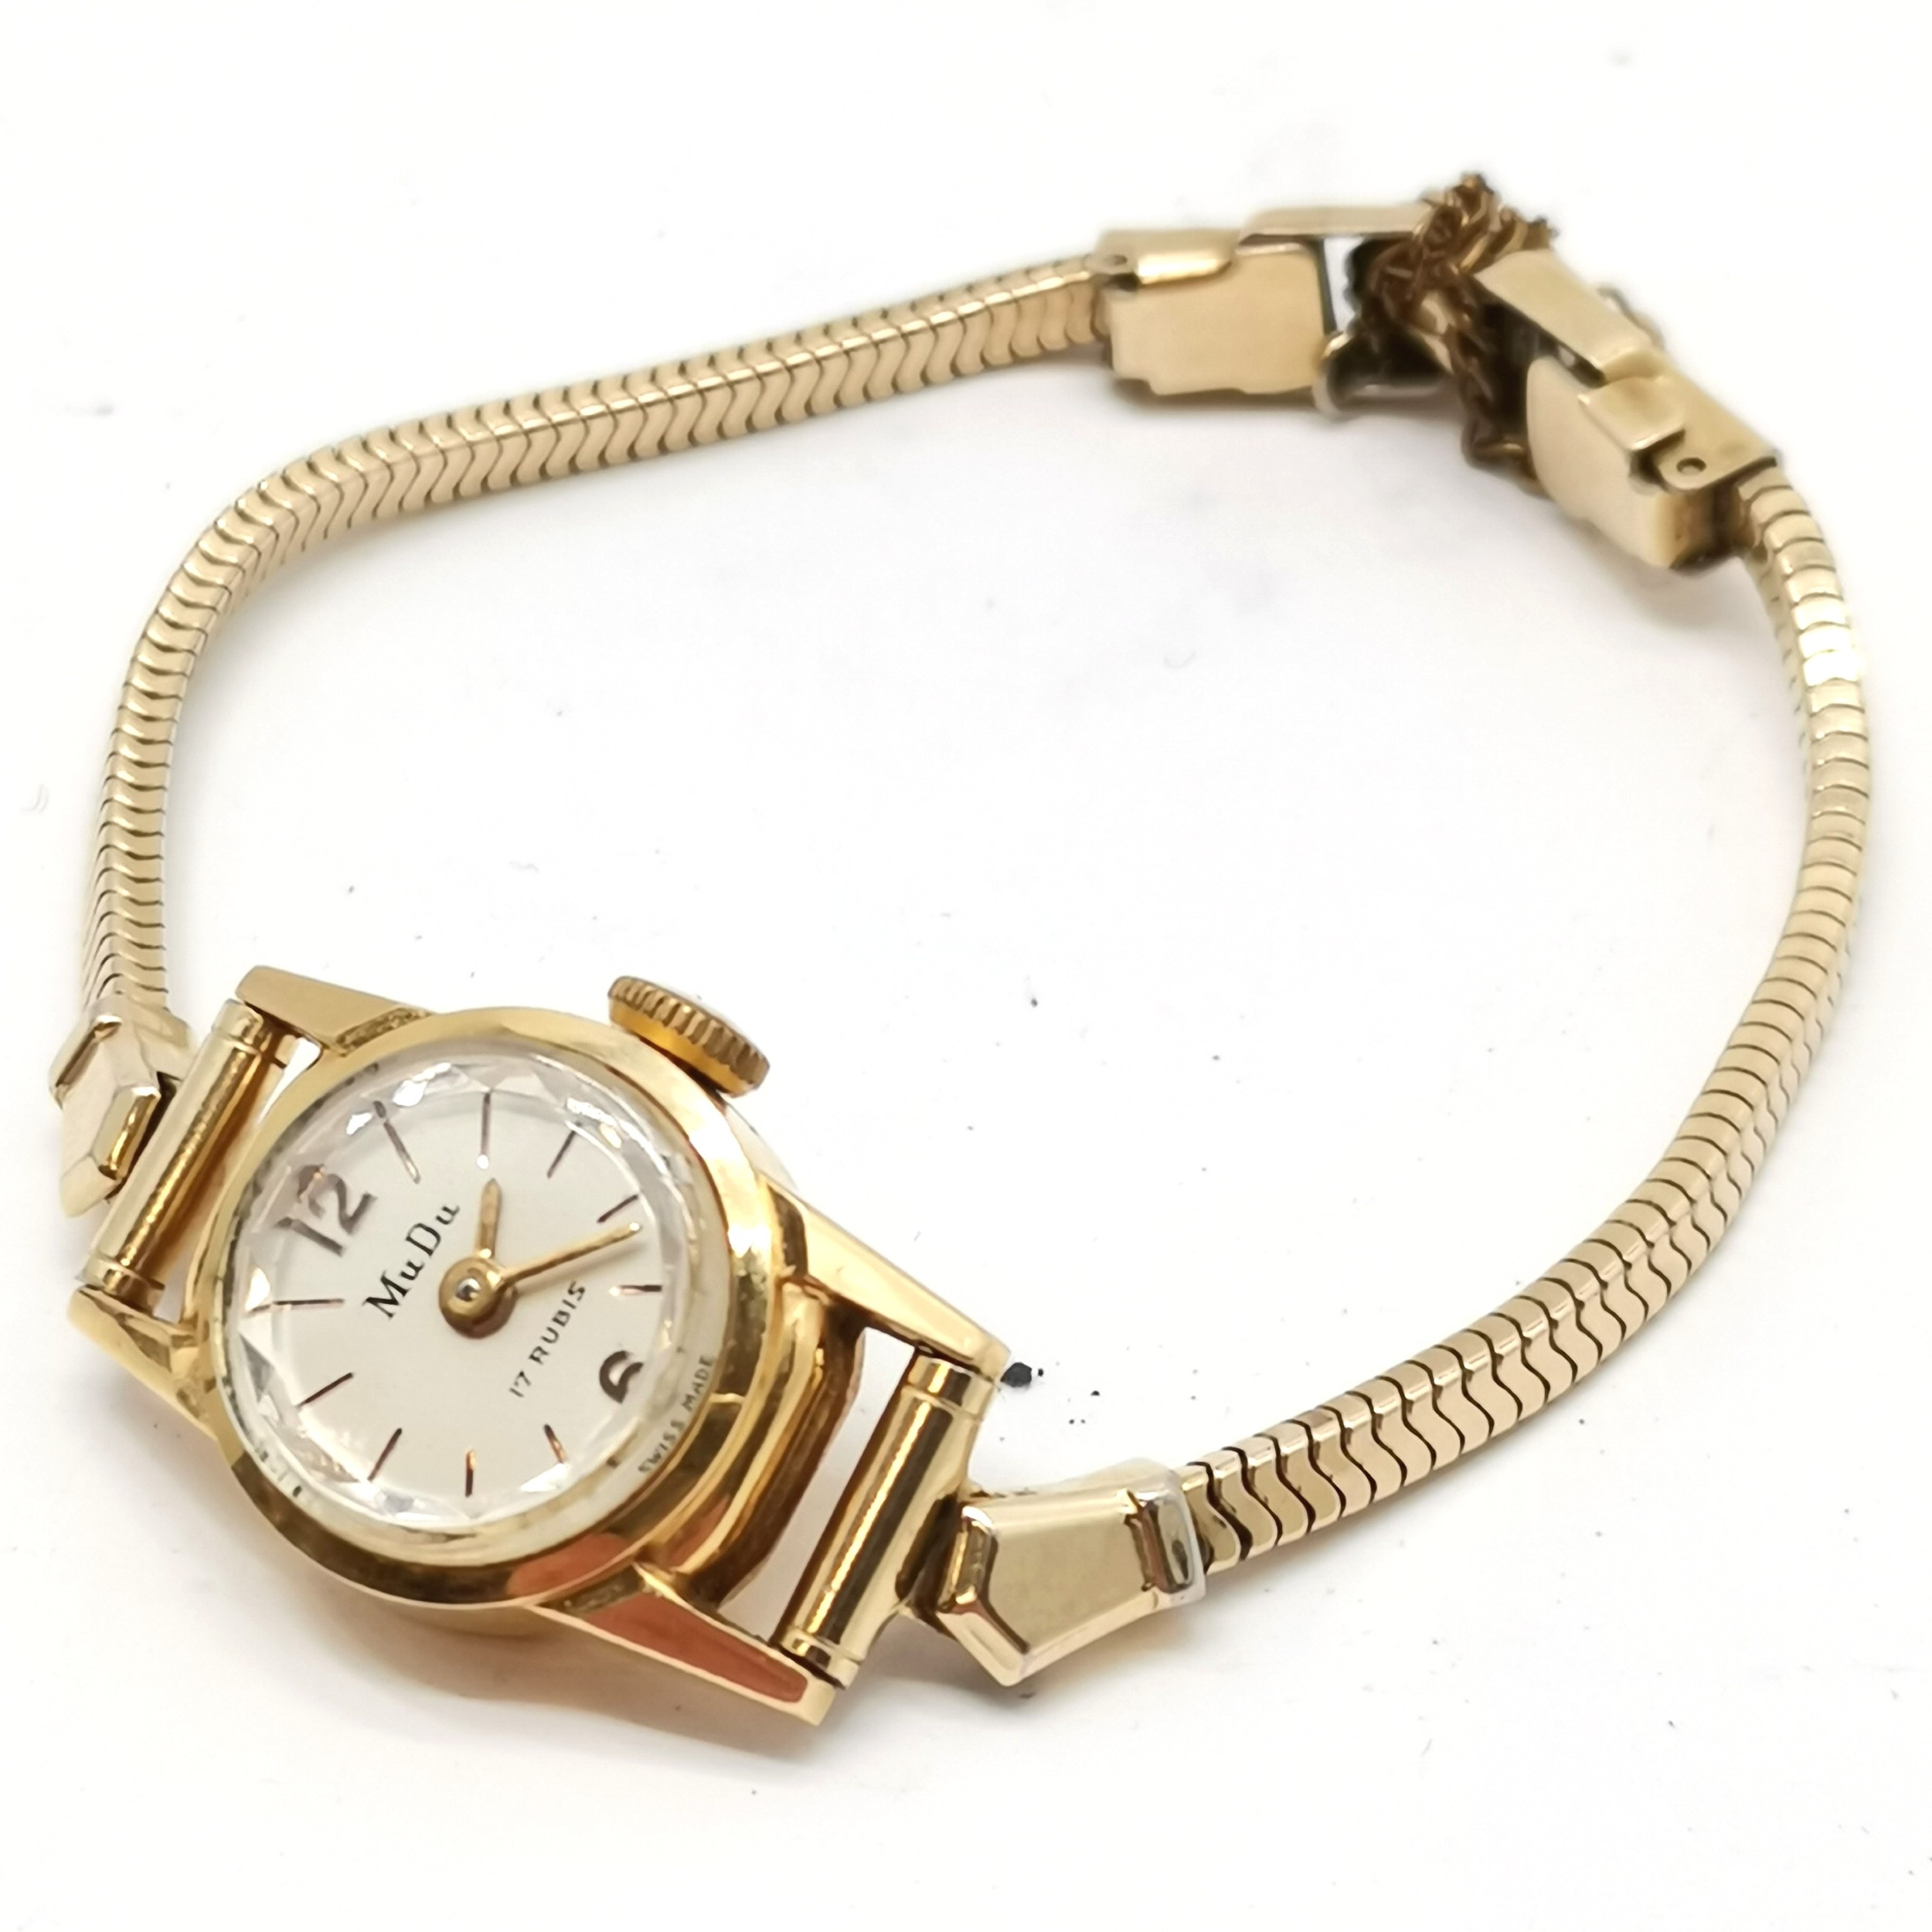 Mudu 18ct marked gold cased automatic ladies wristwatch (14mm case) on a gold plated strap - total